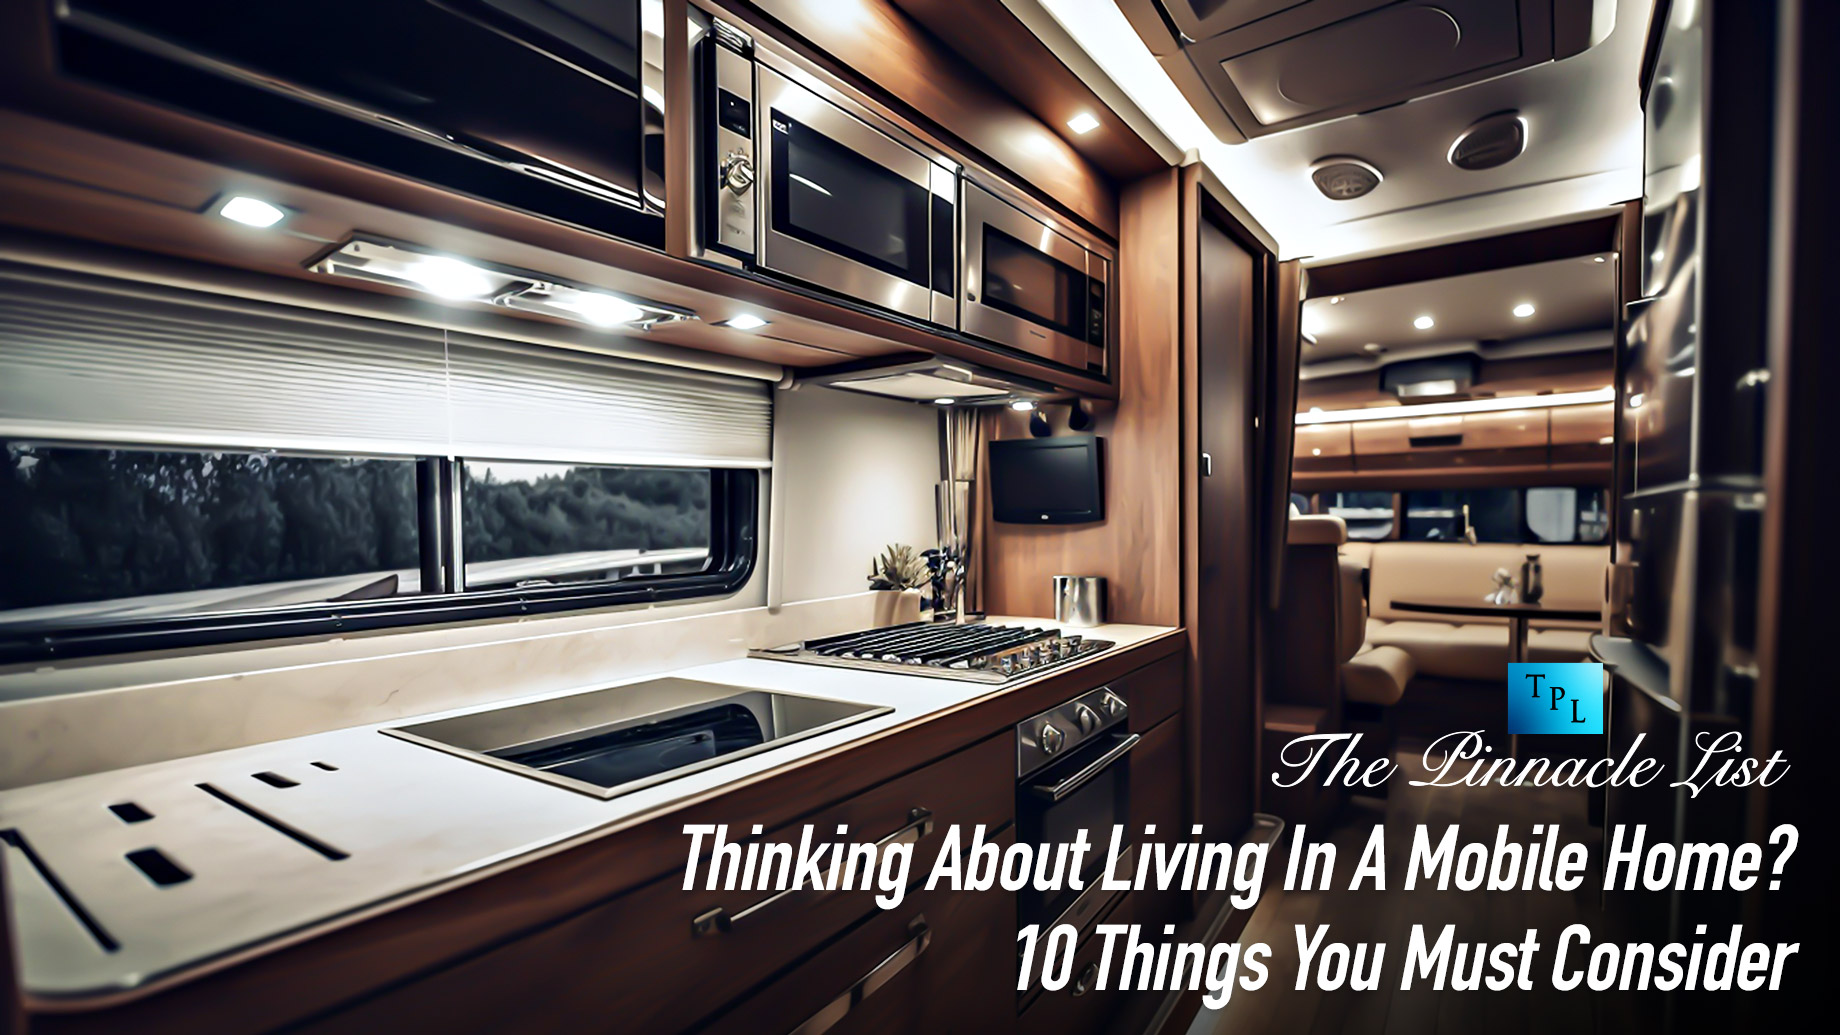 Thinking About Living In A Mobile Home? 10 Things You Must Consider